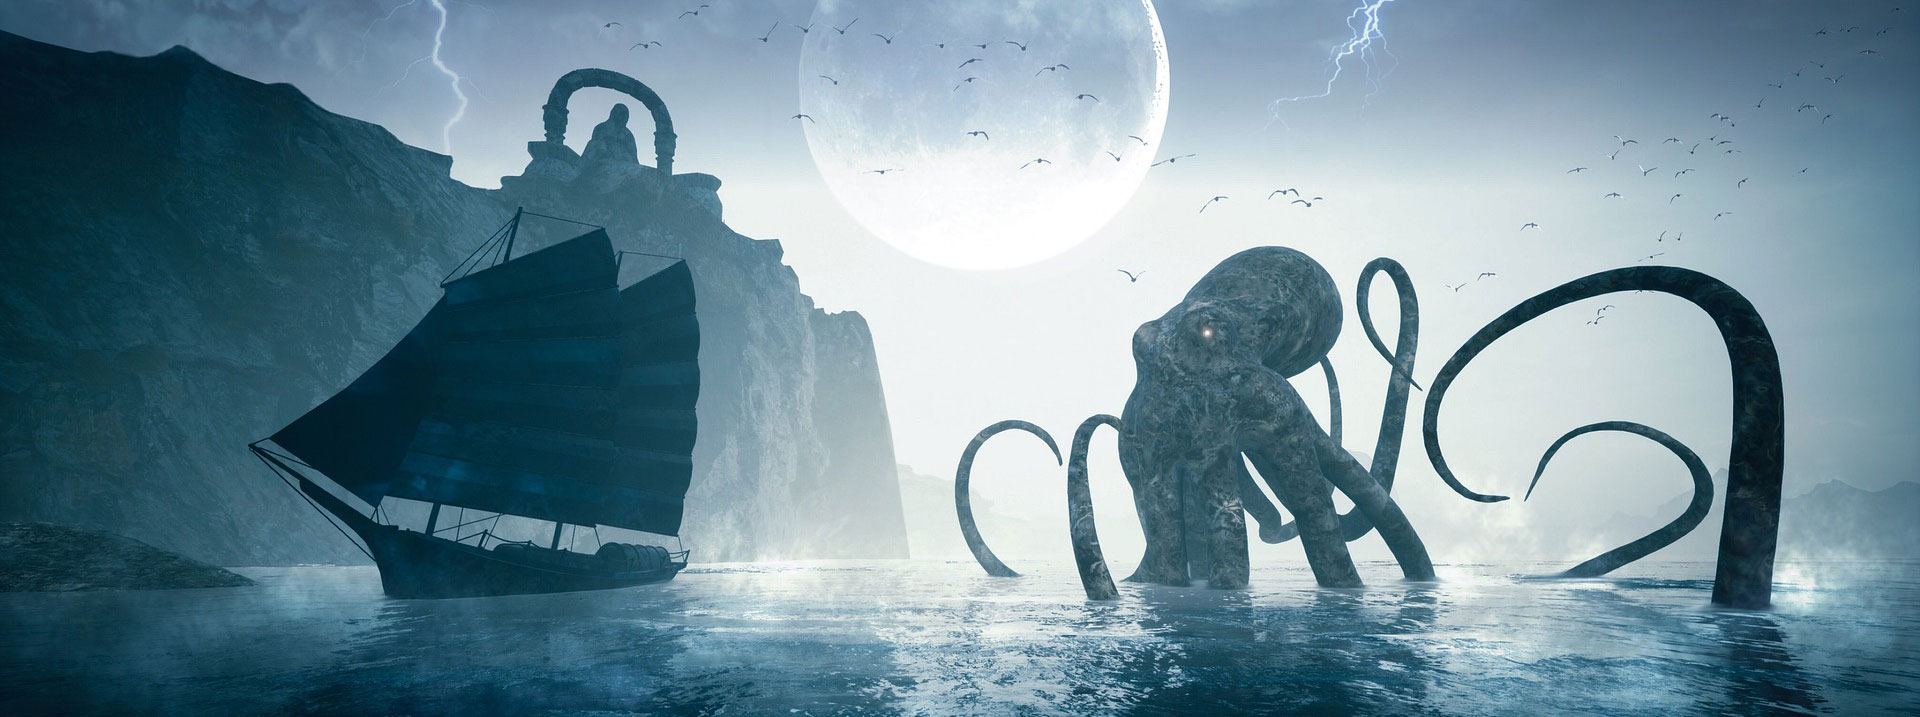 History's Great Mythical Sea Monsters